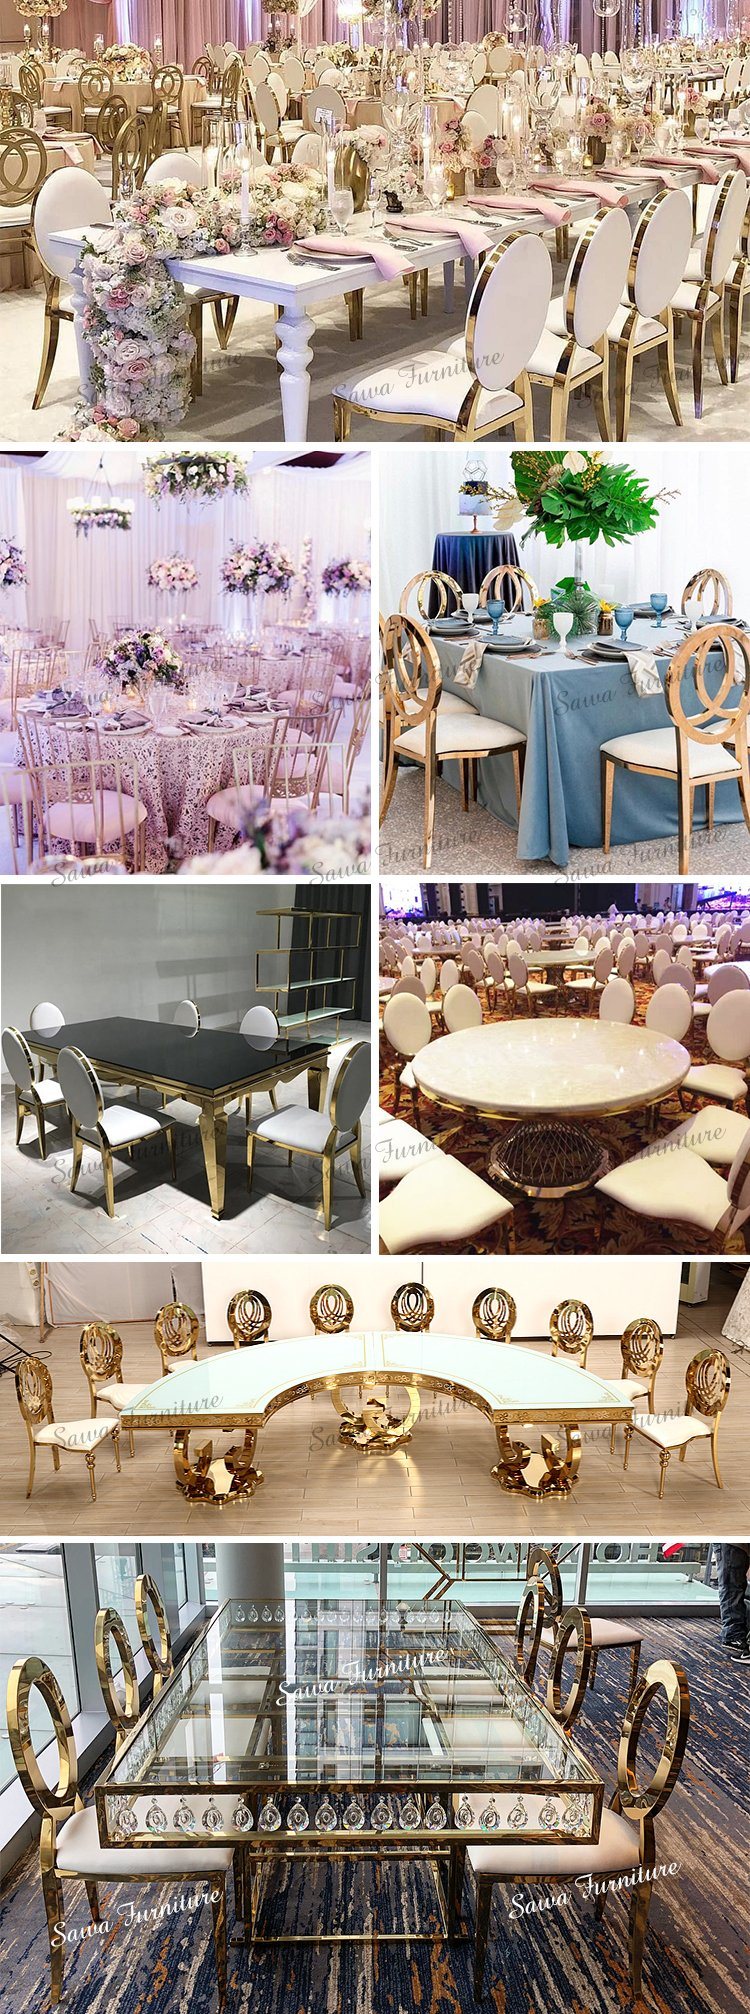 Luxurious Stainless Steel Wedding Hotel Banquet Table